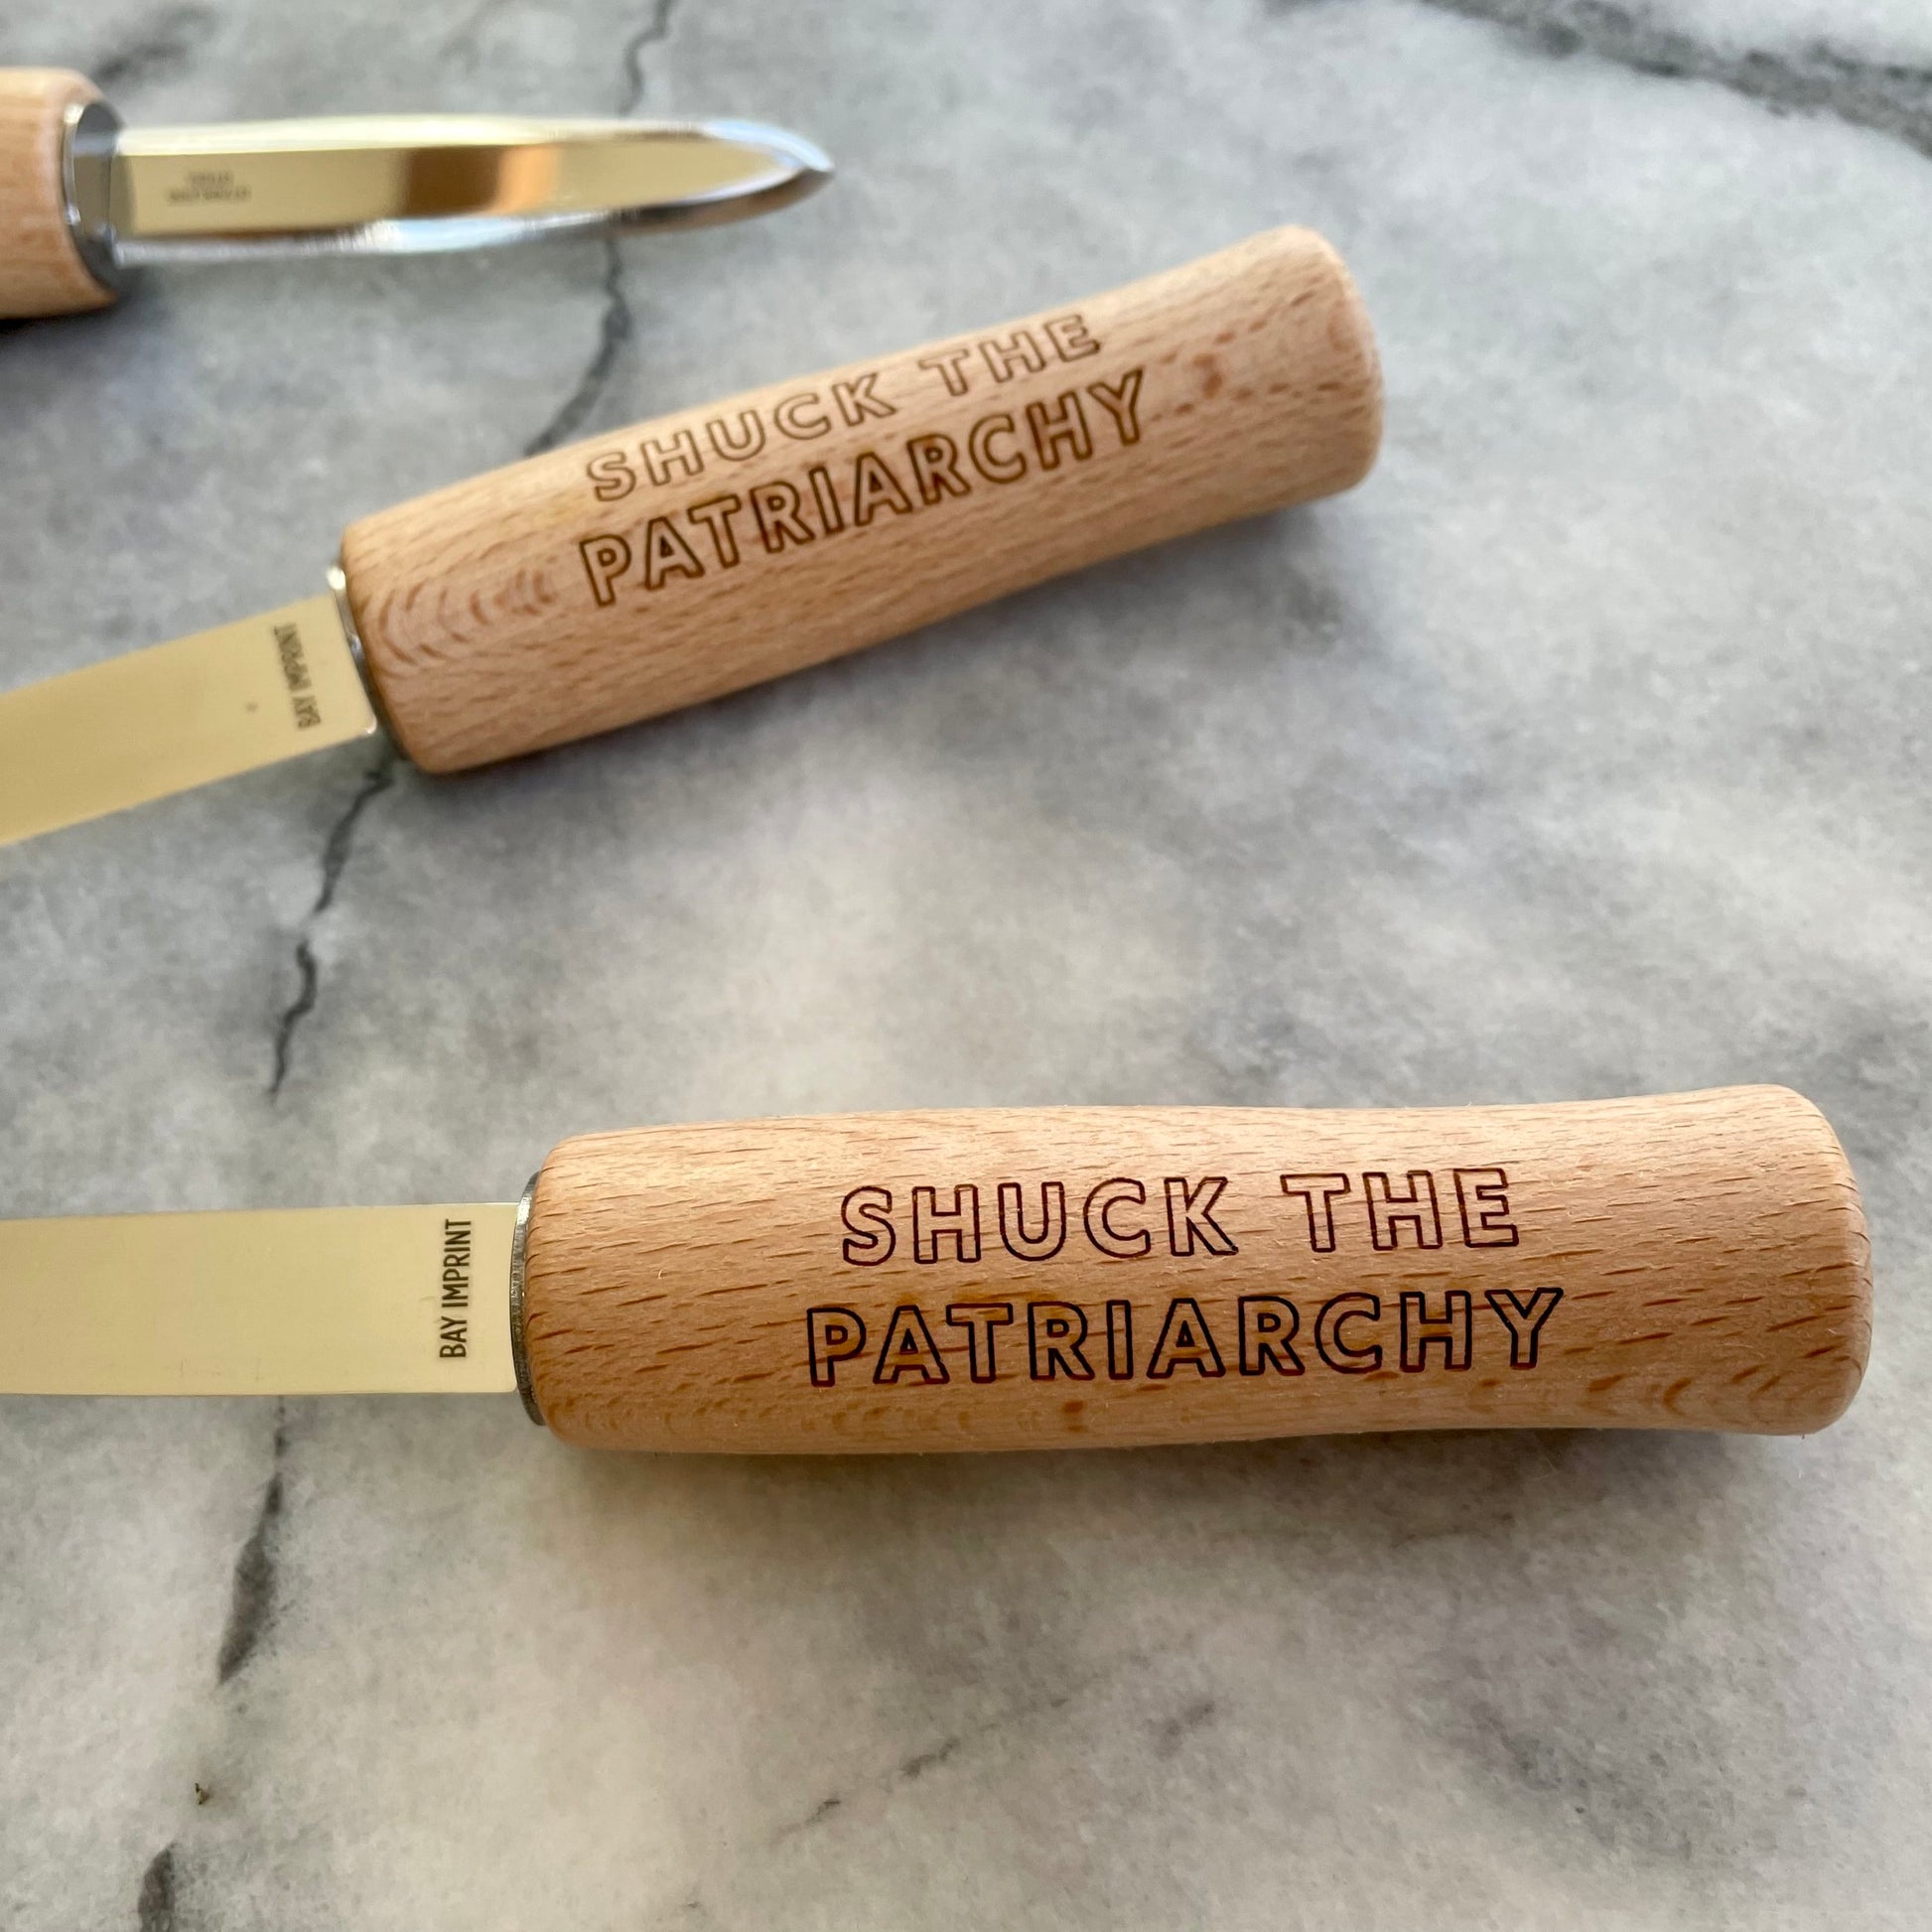 The handle of an oyster shucking knife reads "Shuck the Patriarchy"